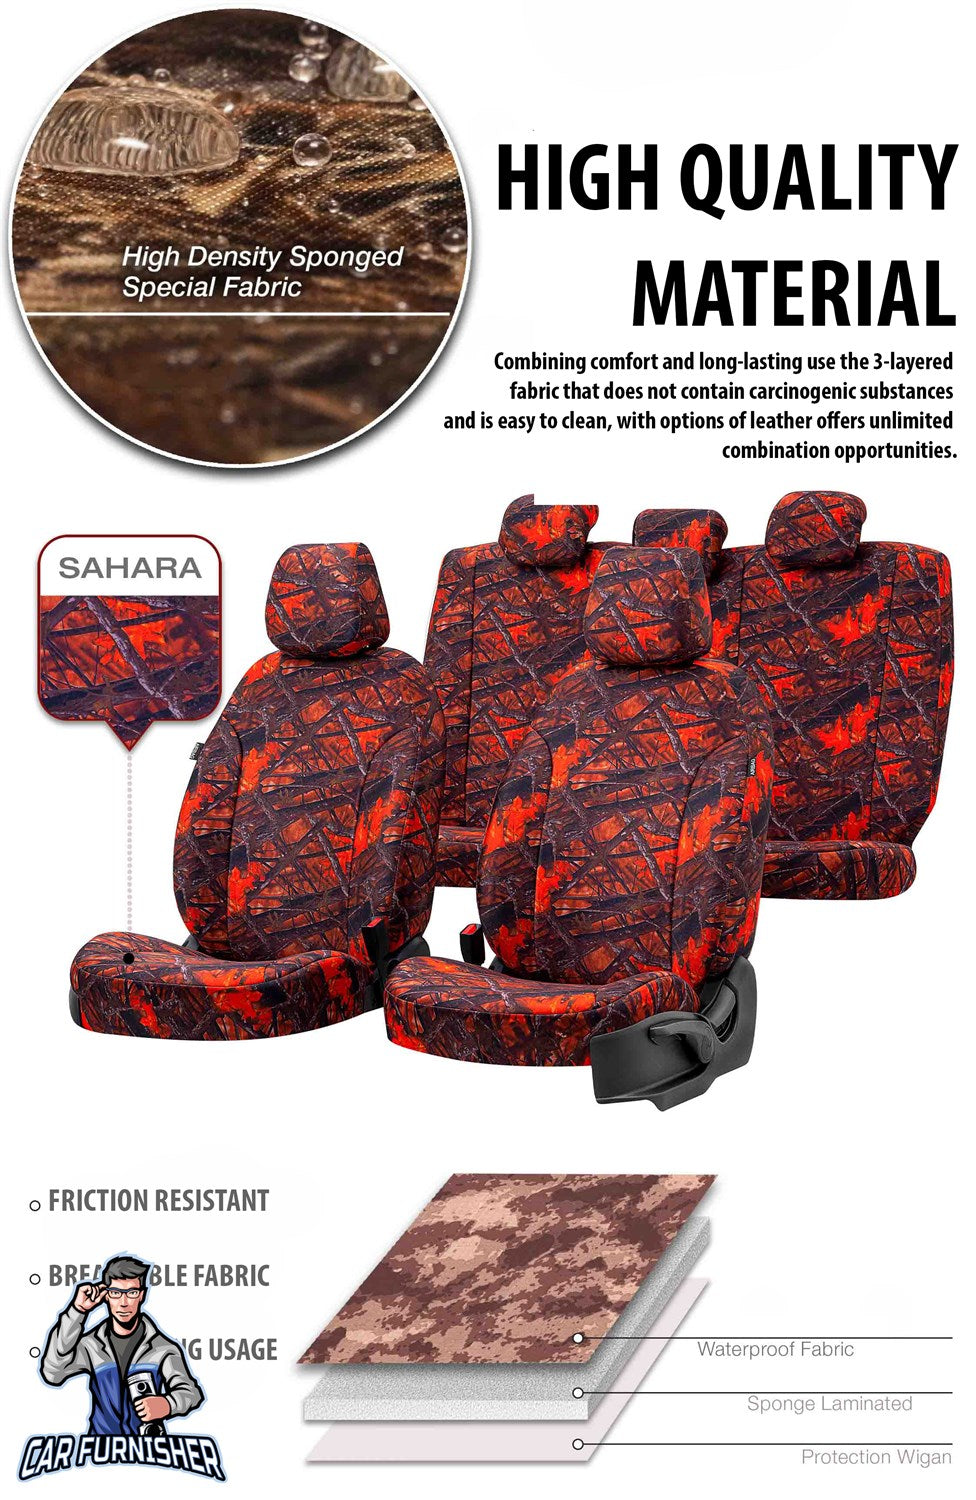 Jeep Grand Cherokee Seat Cover Camouflage Waterproof Design Montblanc Camo Waterproof Fabric